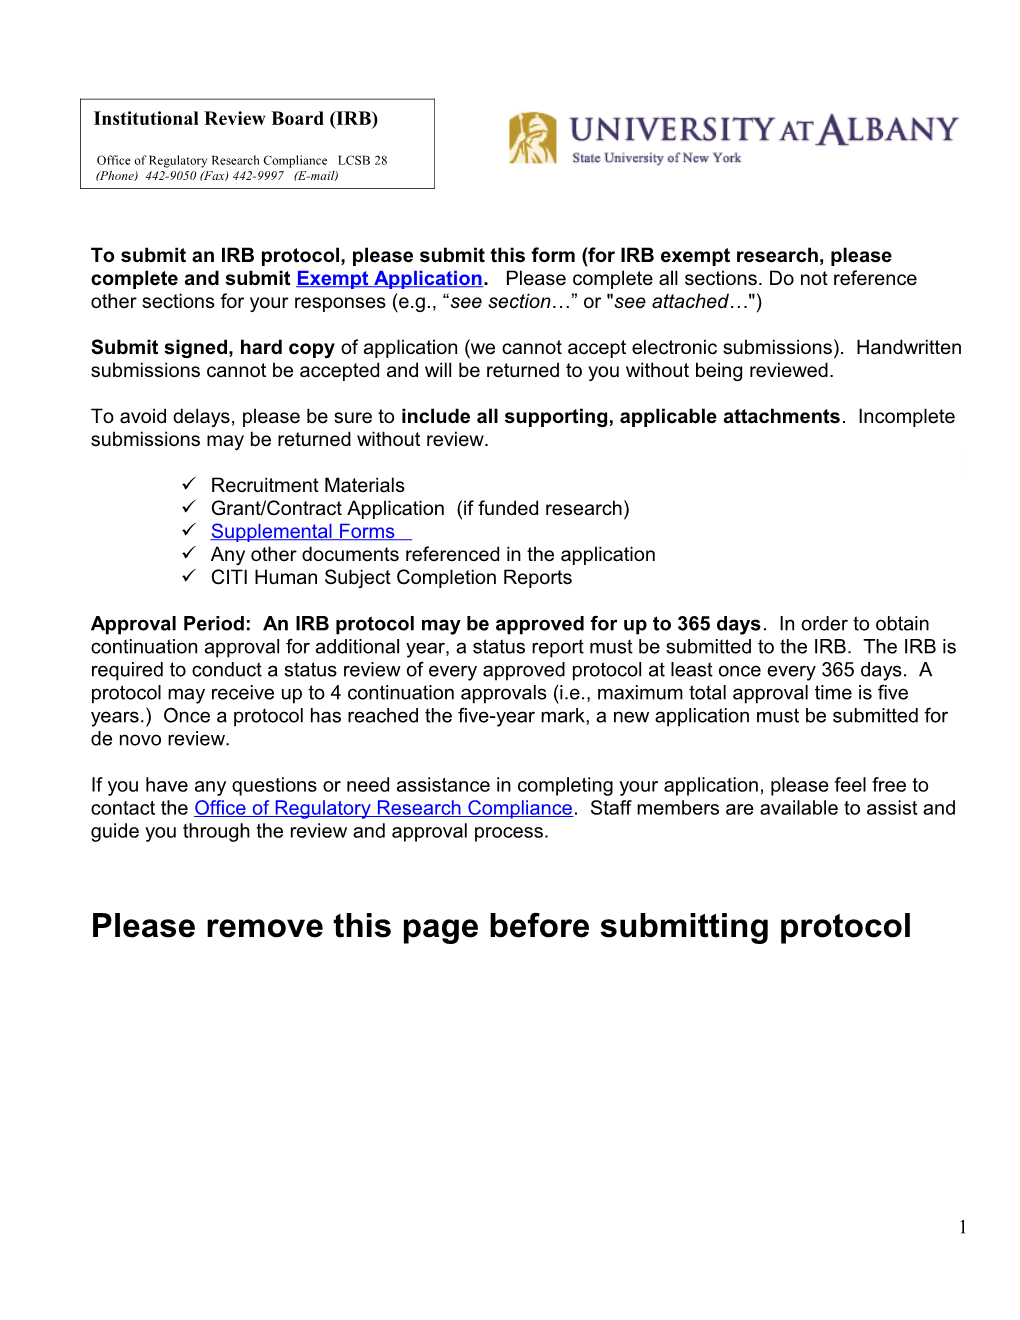 To Submit an IRB Protocol, Please Submit This Form (For IRB Exempt Research, Please Complete